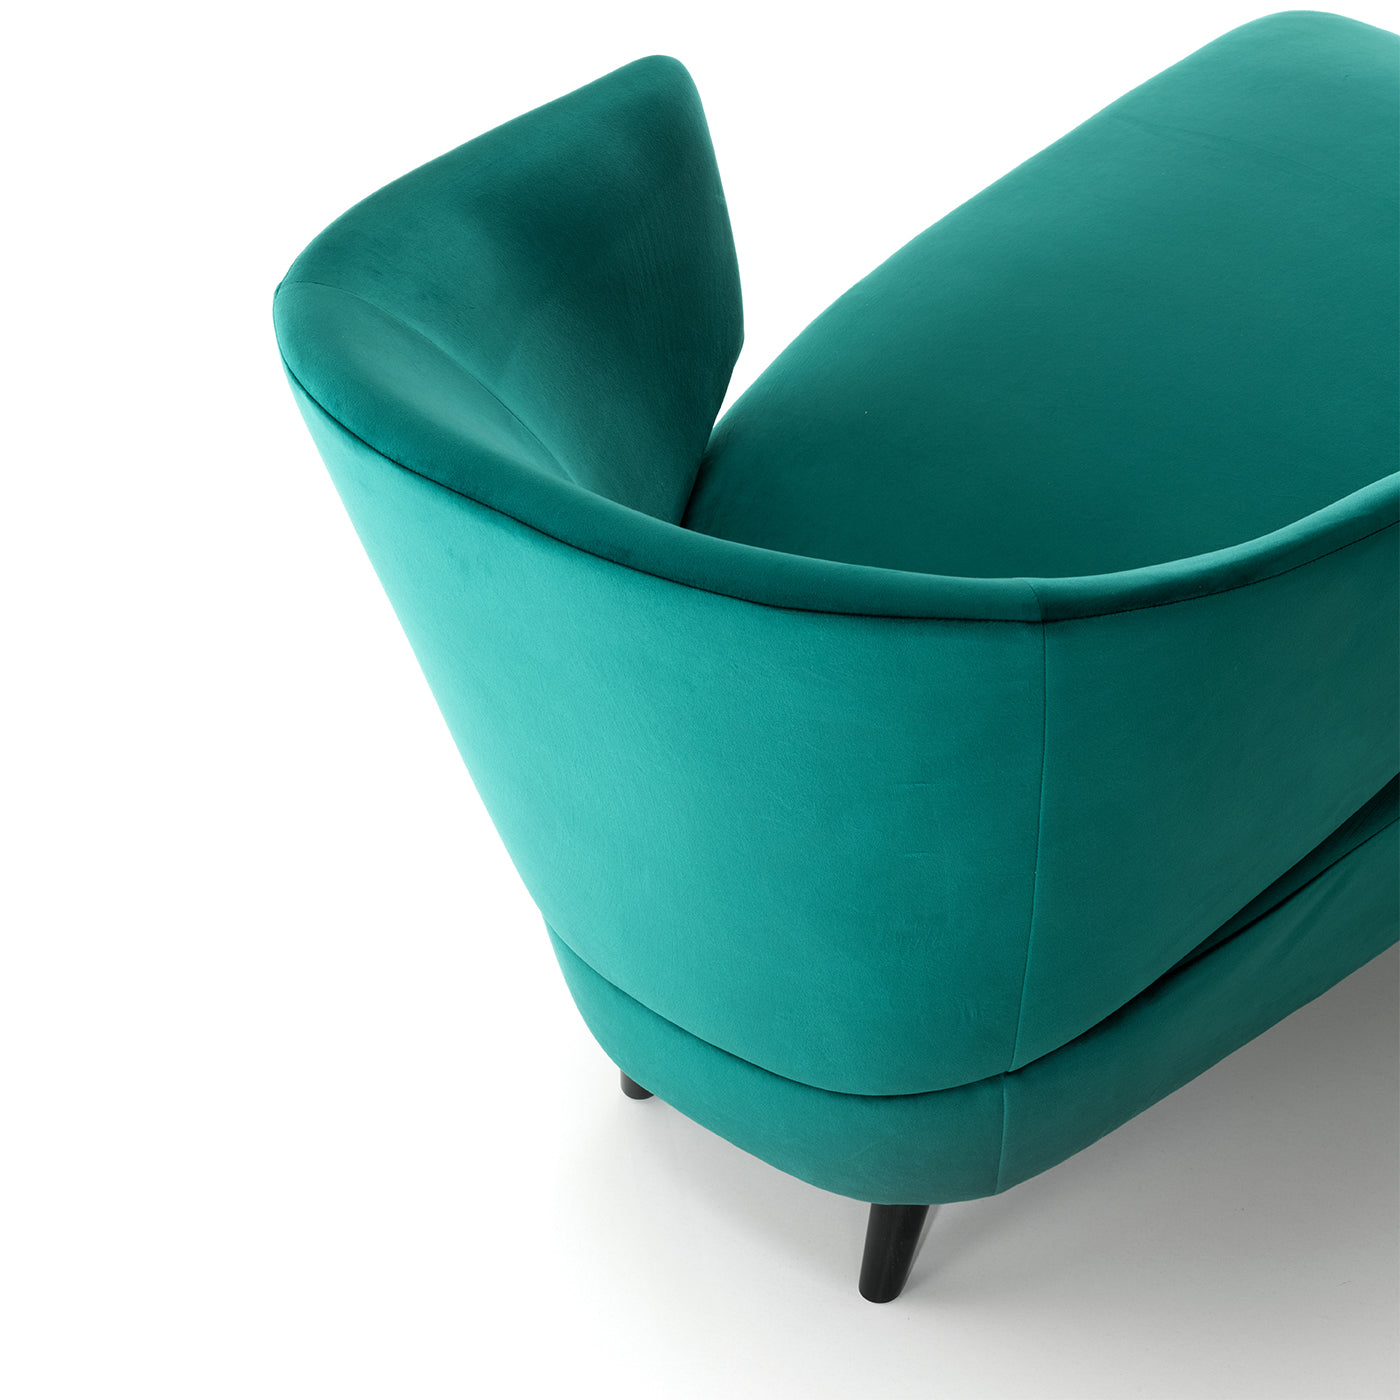 Arsenale GL1 Green Chaise Longue - Alternative view 1